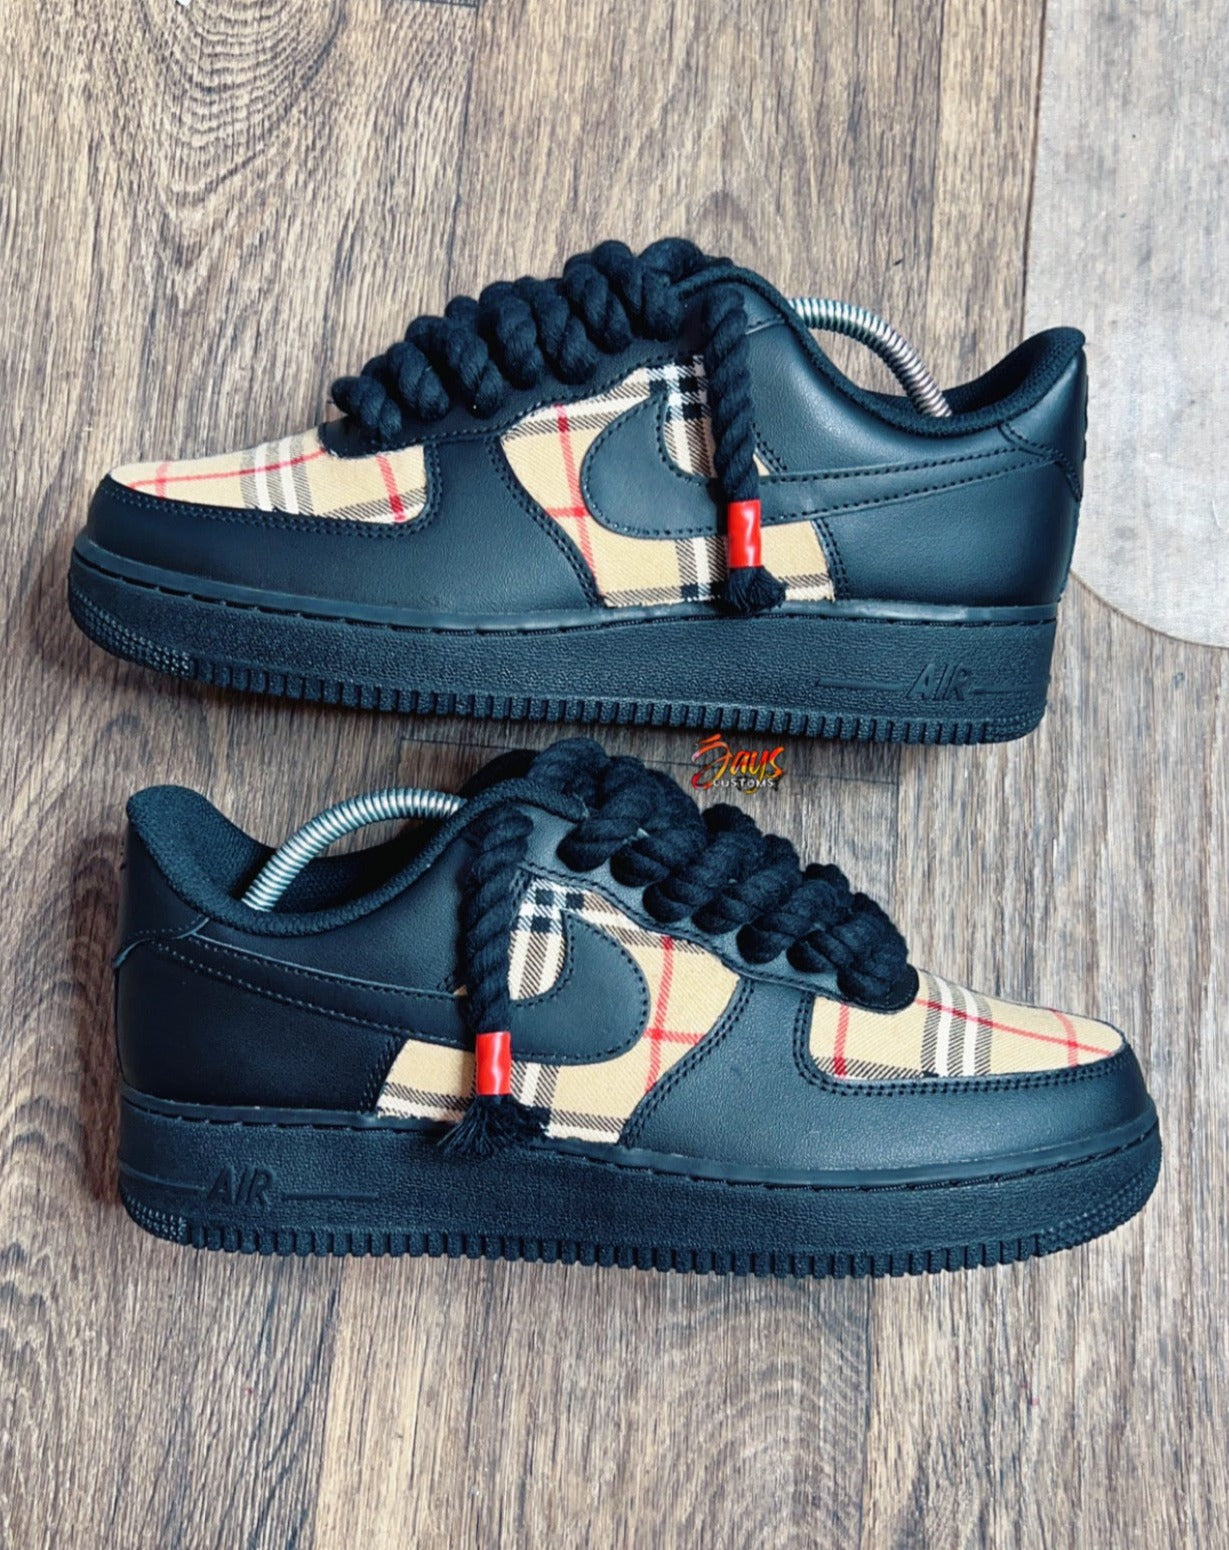 Custom Air Force 1 Rope Lace Black Air Force Shoes Rope Lace 